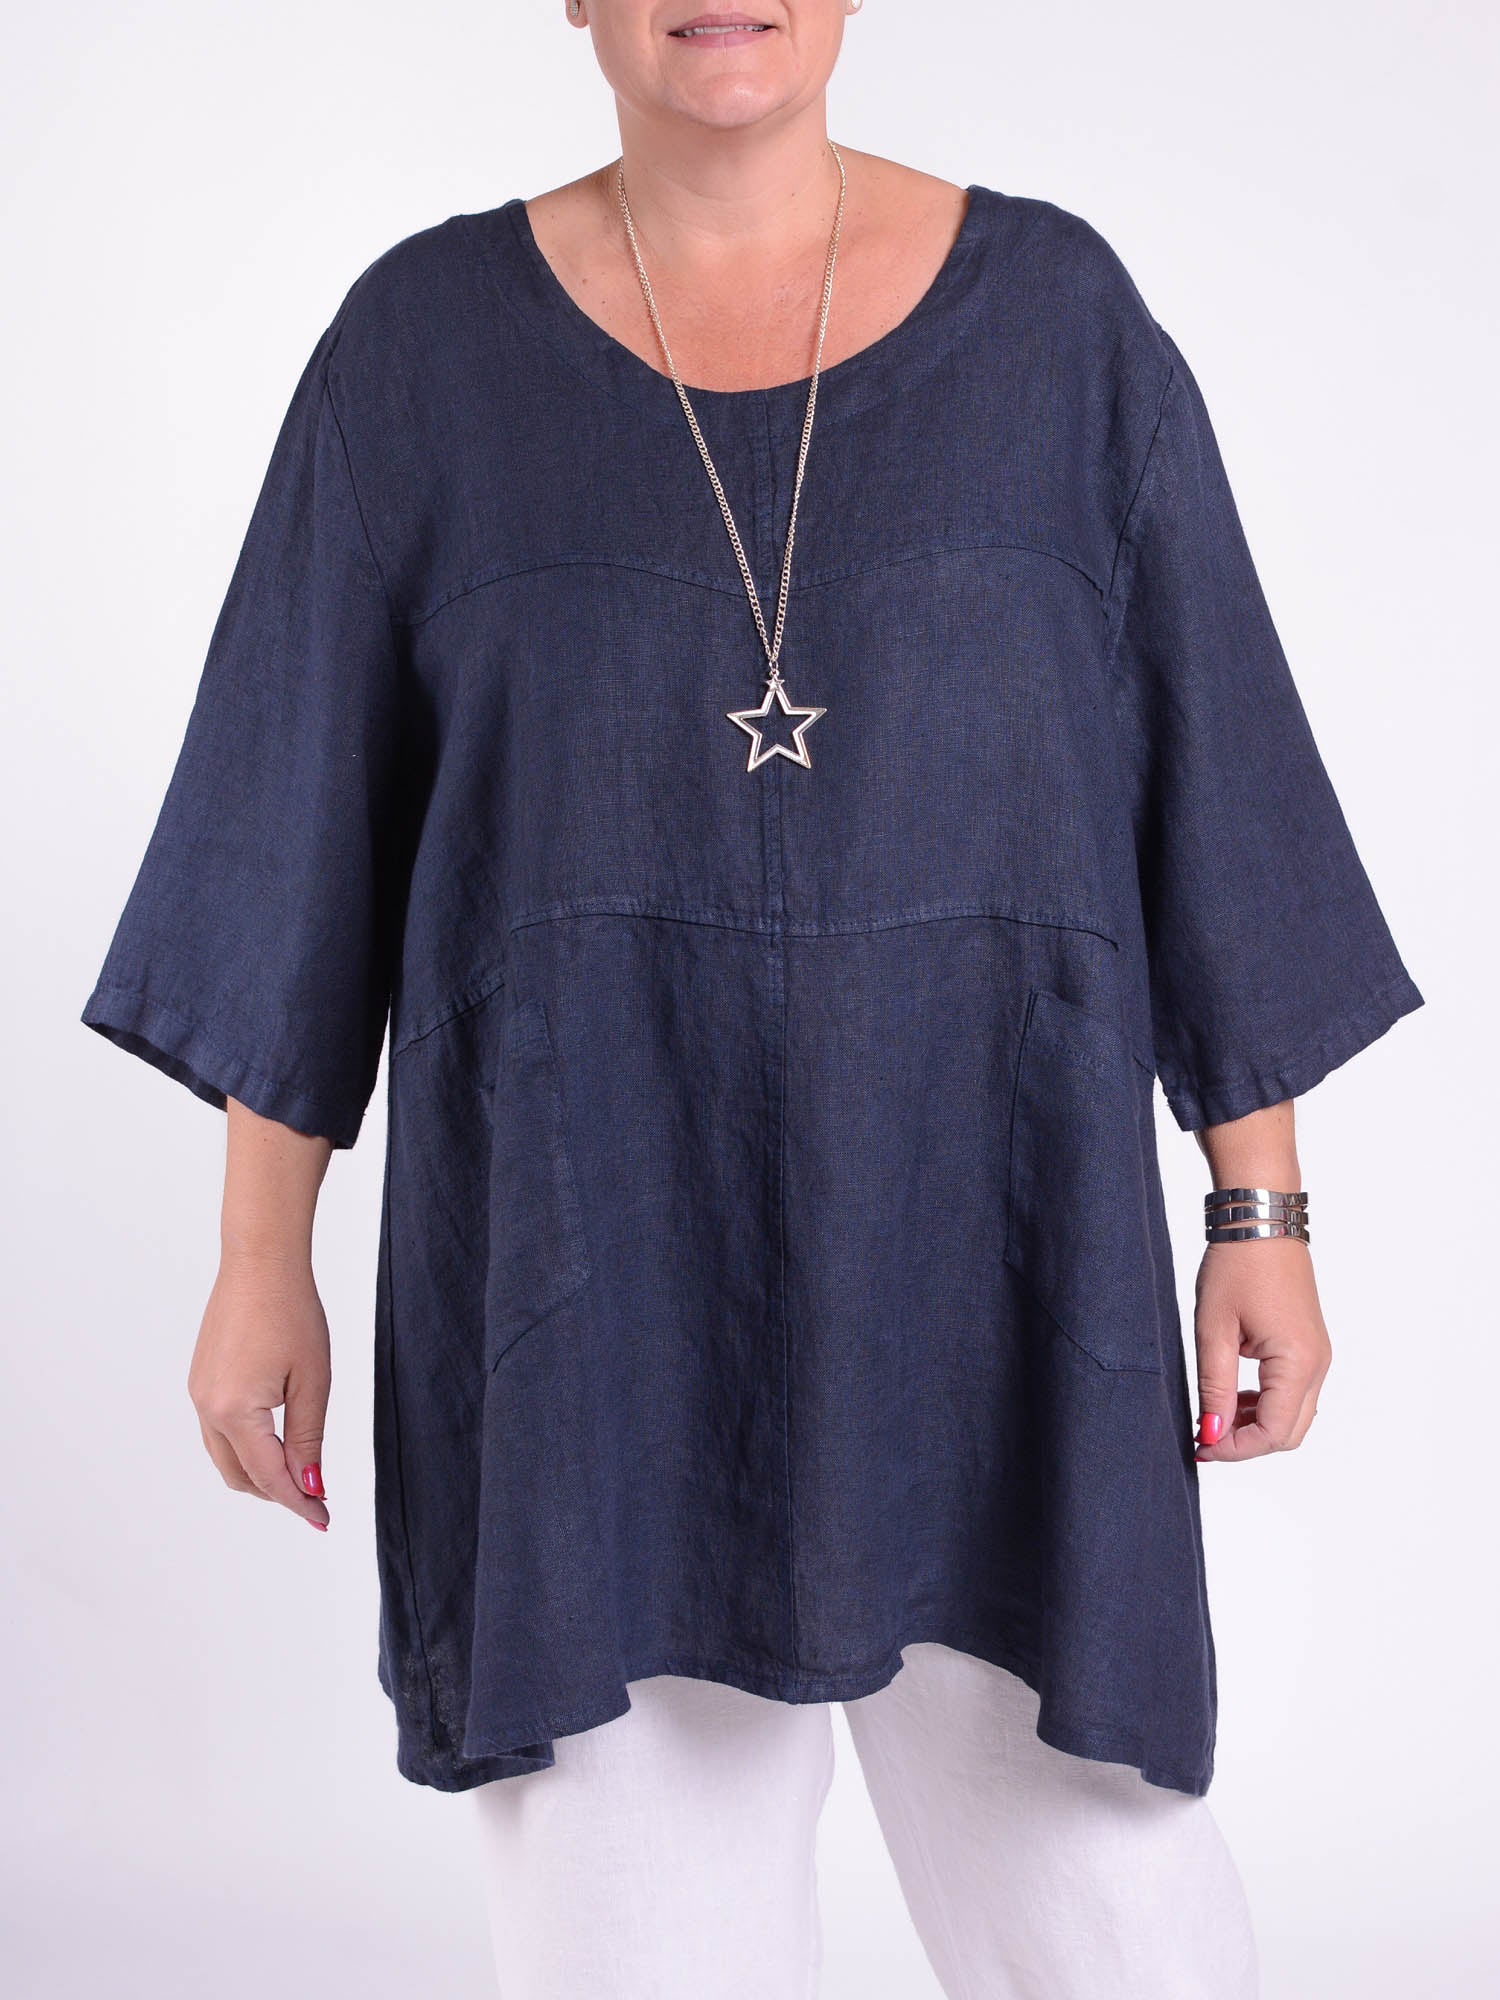 Heavy Linen Tunic - 105151, Tops & Shirts, Pure Plus Clothing, Lagenlook Clothing, Plus Size Fashion, Over 50 Fashion